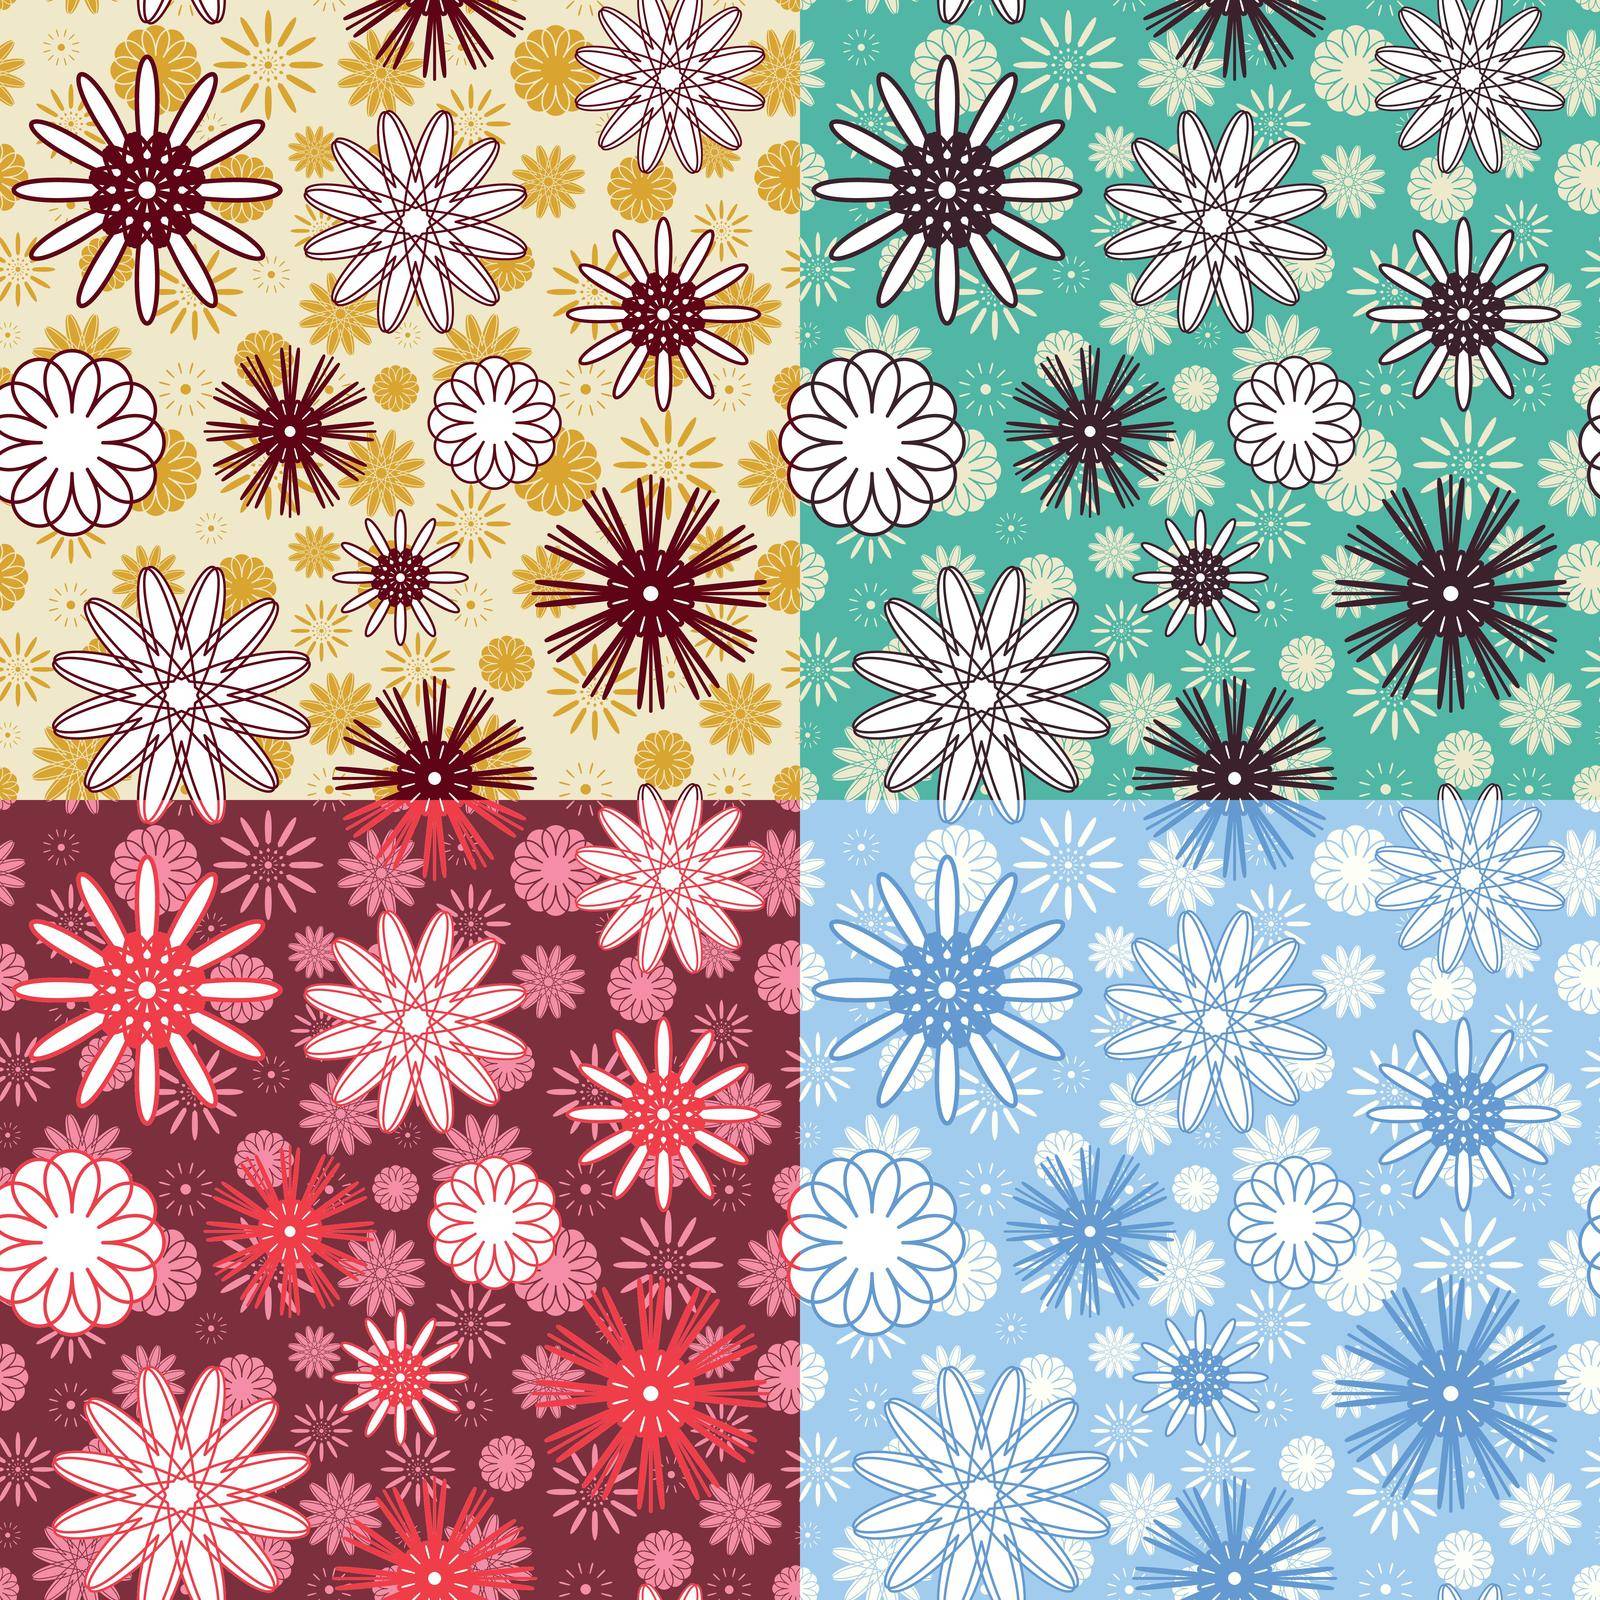 Floral Seamless Texture by dacascas